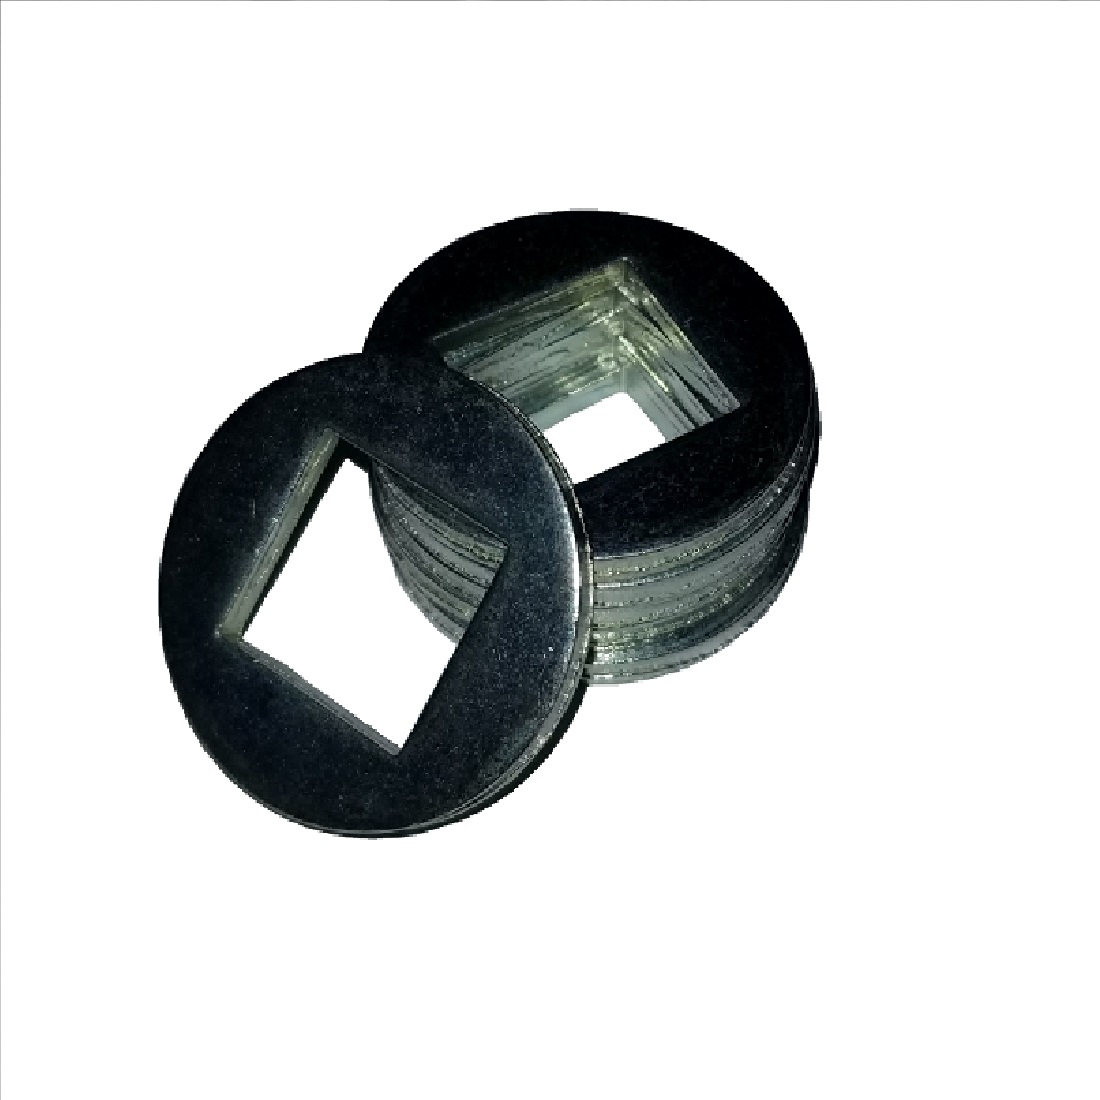 Square ID Washer - 1.148 ID, 2.000 OD, 0.095 Thick, Low Carbon Steel - Soft, Phosphate & Oil